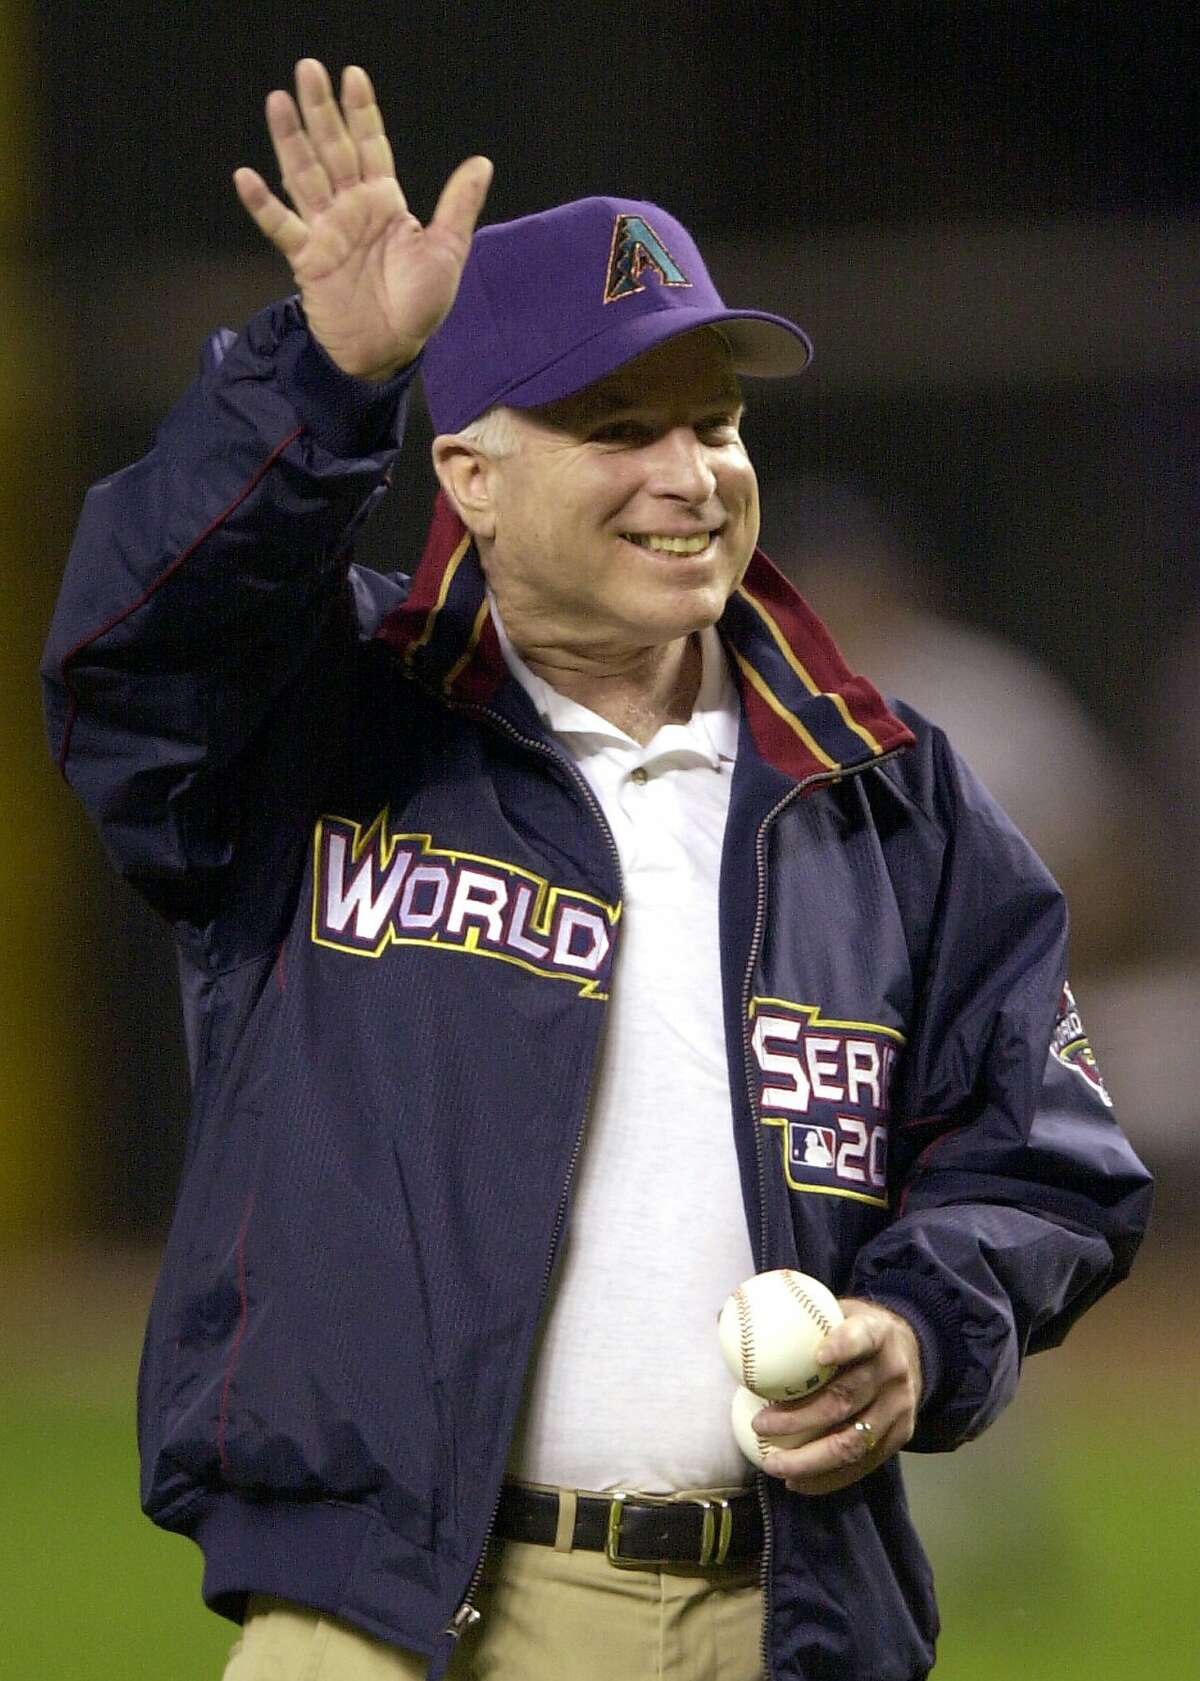 FILE - In this Nov. 4, 2001, file photo, Republican presidential candidate Sen. John McCain, R-Ariz., waves to the crowd prior to Game 7 of the World Series between the Arizona Diamondbacks and the New York Yankees at Bank One Ballpark in Phoenix. The sight of McCain sitting in the stands at Chase Field, formerly Bank One Ballpark, became so commonplace few people seemed to even notice. The senator from Arizona would get handshakes and take pictures with fans, but he was there just to be one of them, cheering on the home team. McCain died Saturday, Aug. 25, 2018, after battling brain cancer and the Arizona sports community mourned him across the Valley of the Sun. He was 81. (AP Photo/John Bazemore, File)